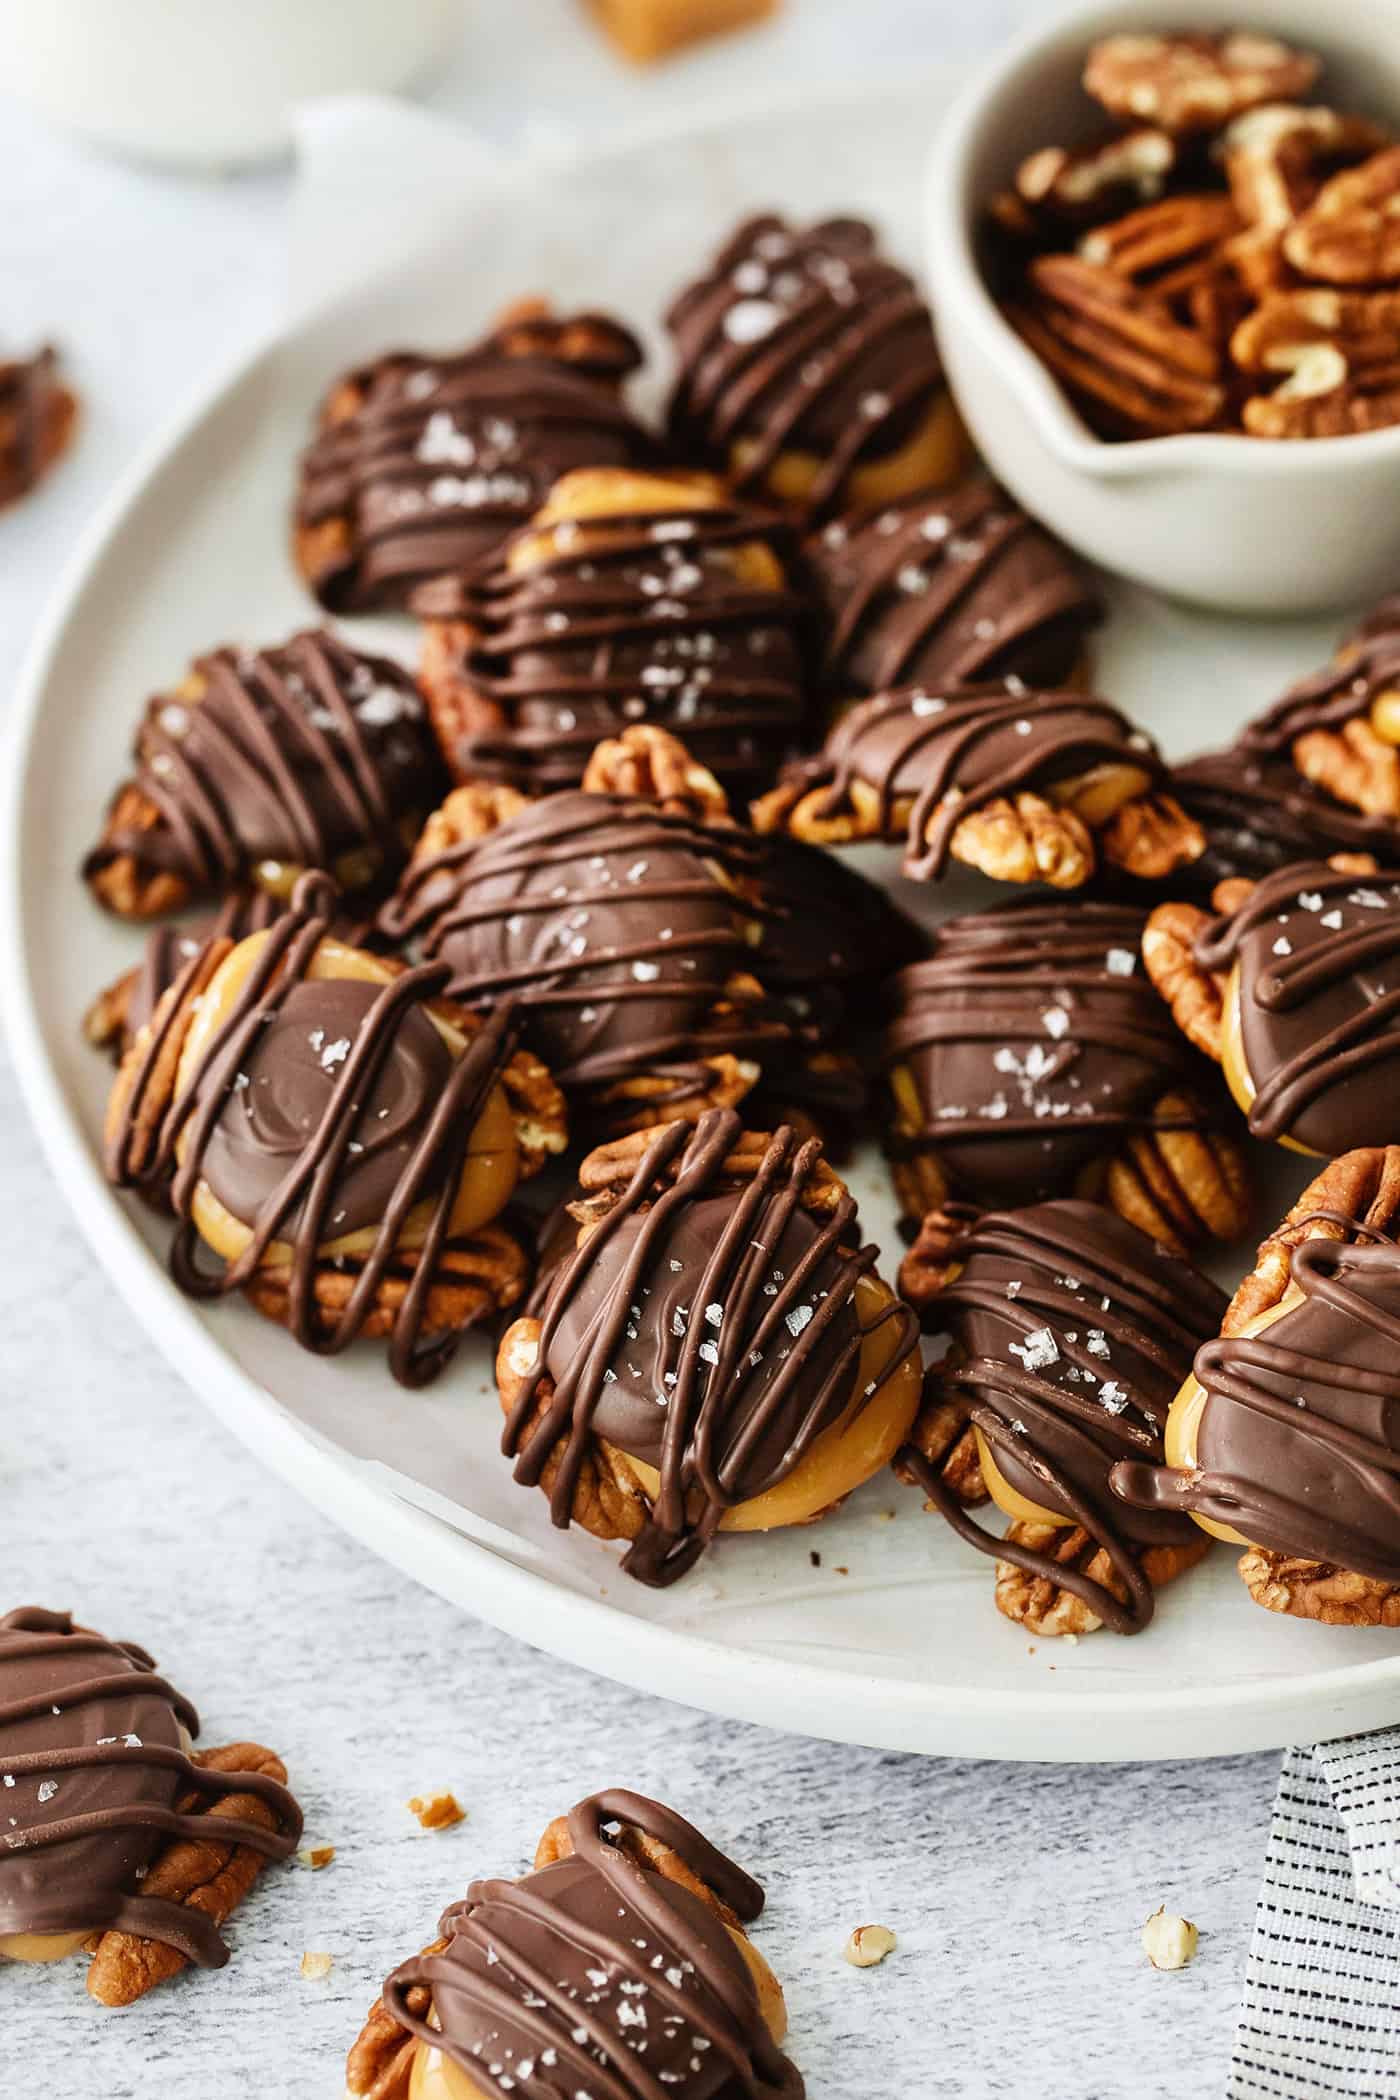 A white bowl holds a batch of chocolate turtles candy drizzled with melted chocolate and topped with flaky salt, and a bowl of pecans next to them.